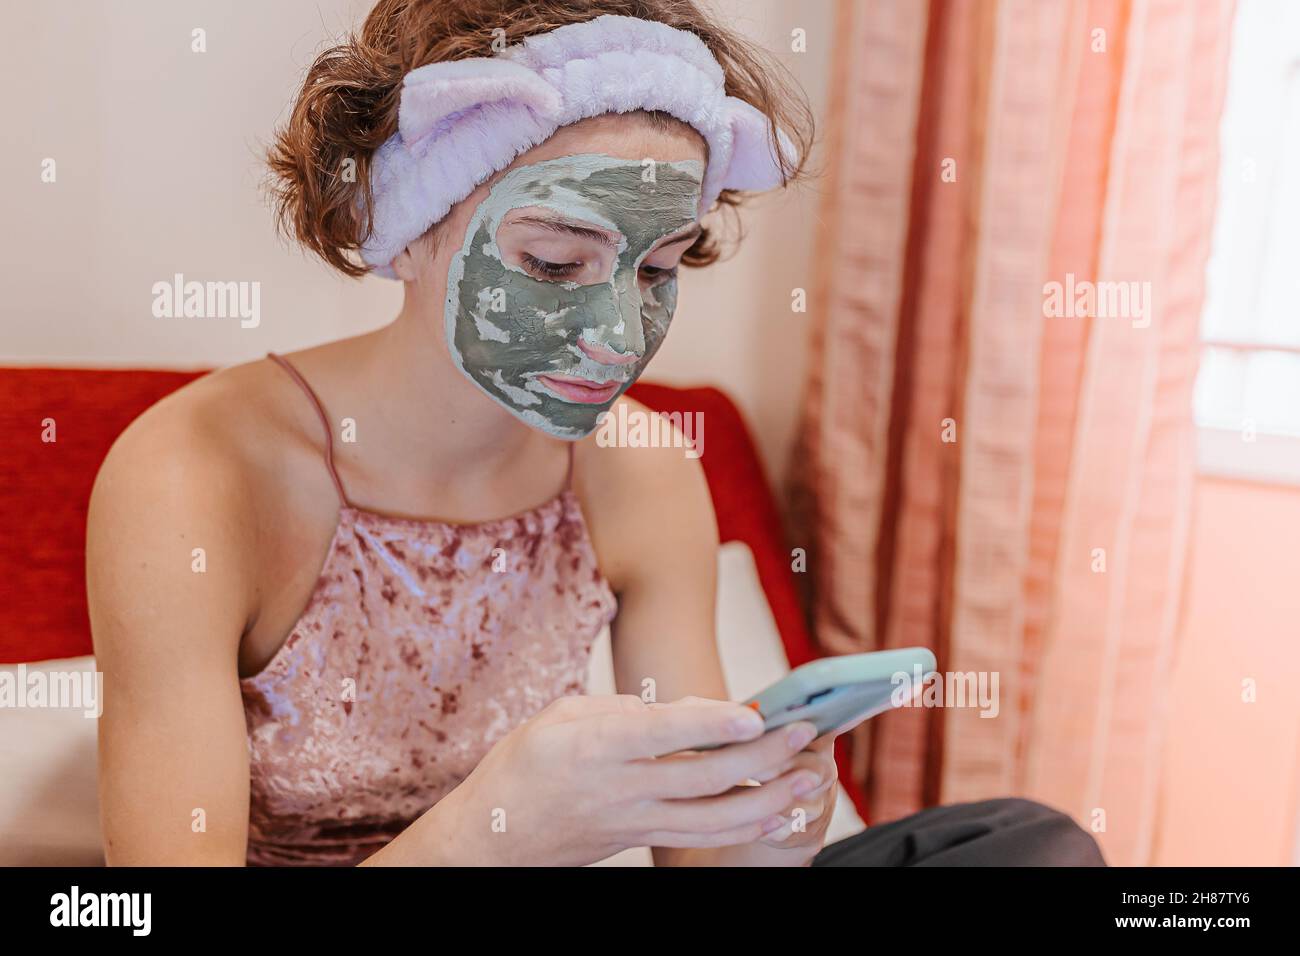 teenage girl brown curly hair clay cosmetic mask on her face takes care of her face at home and communicates online writes message her girlfriend whil Stock Photo